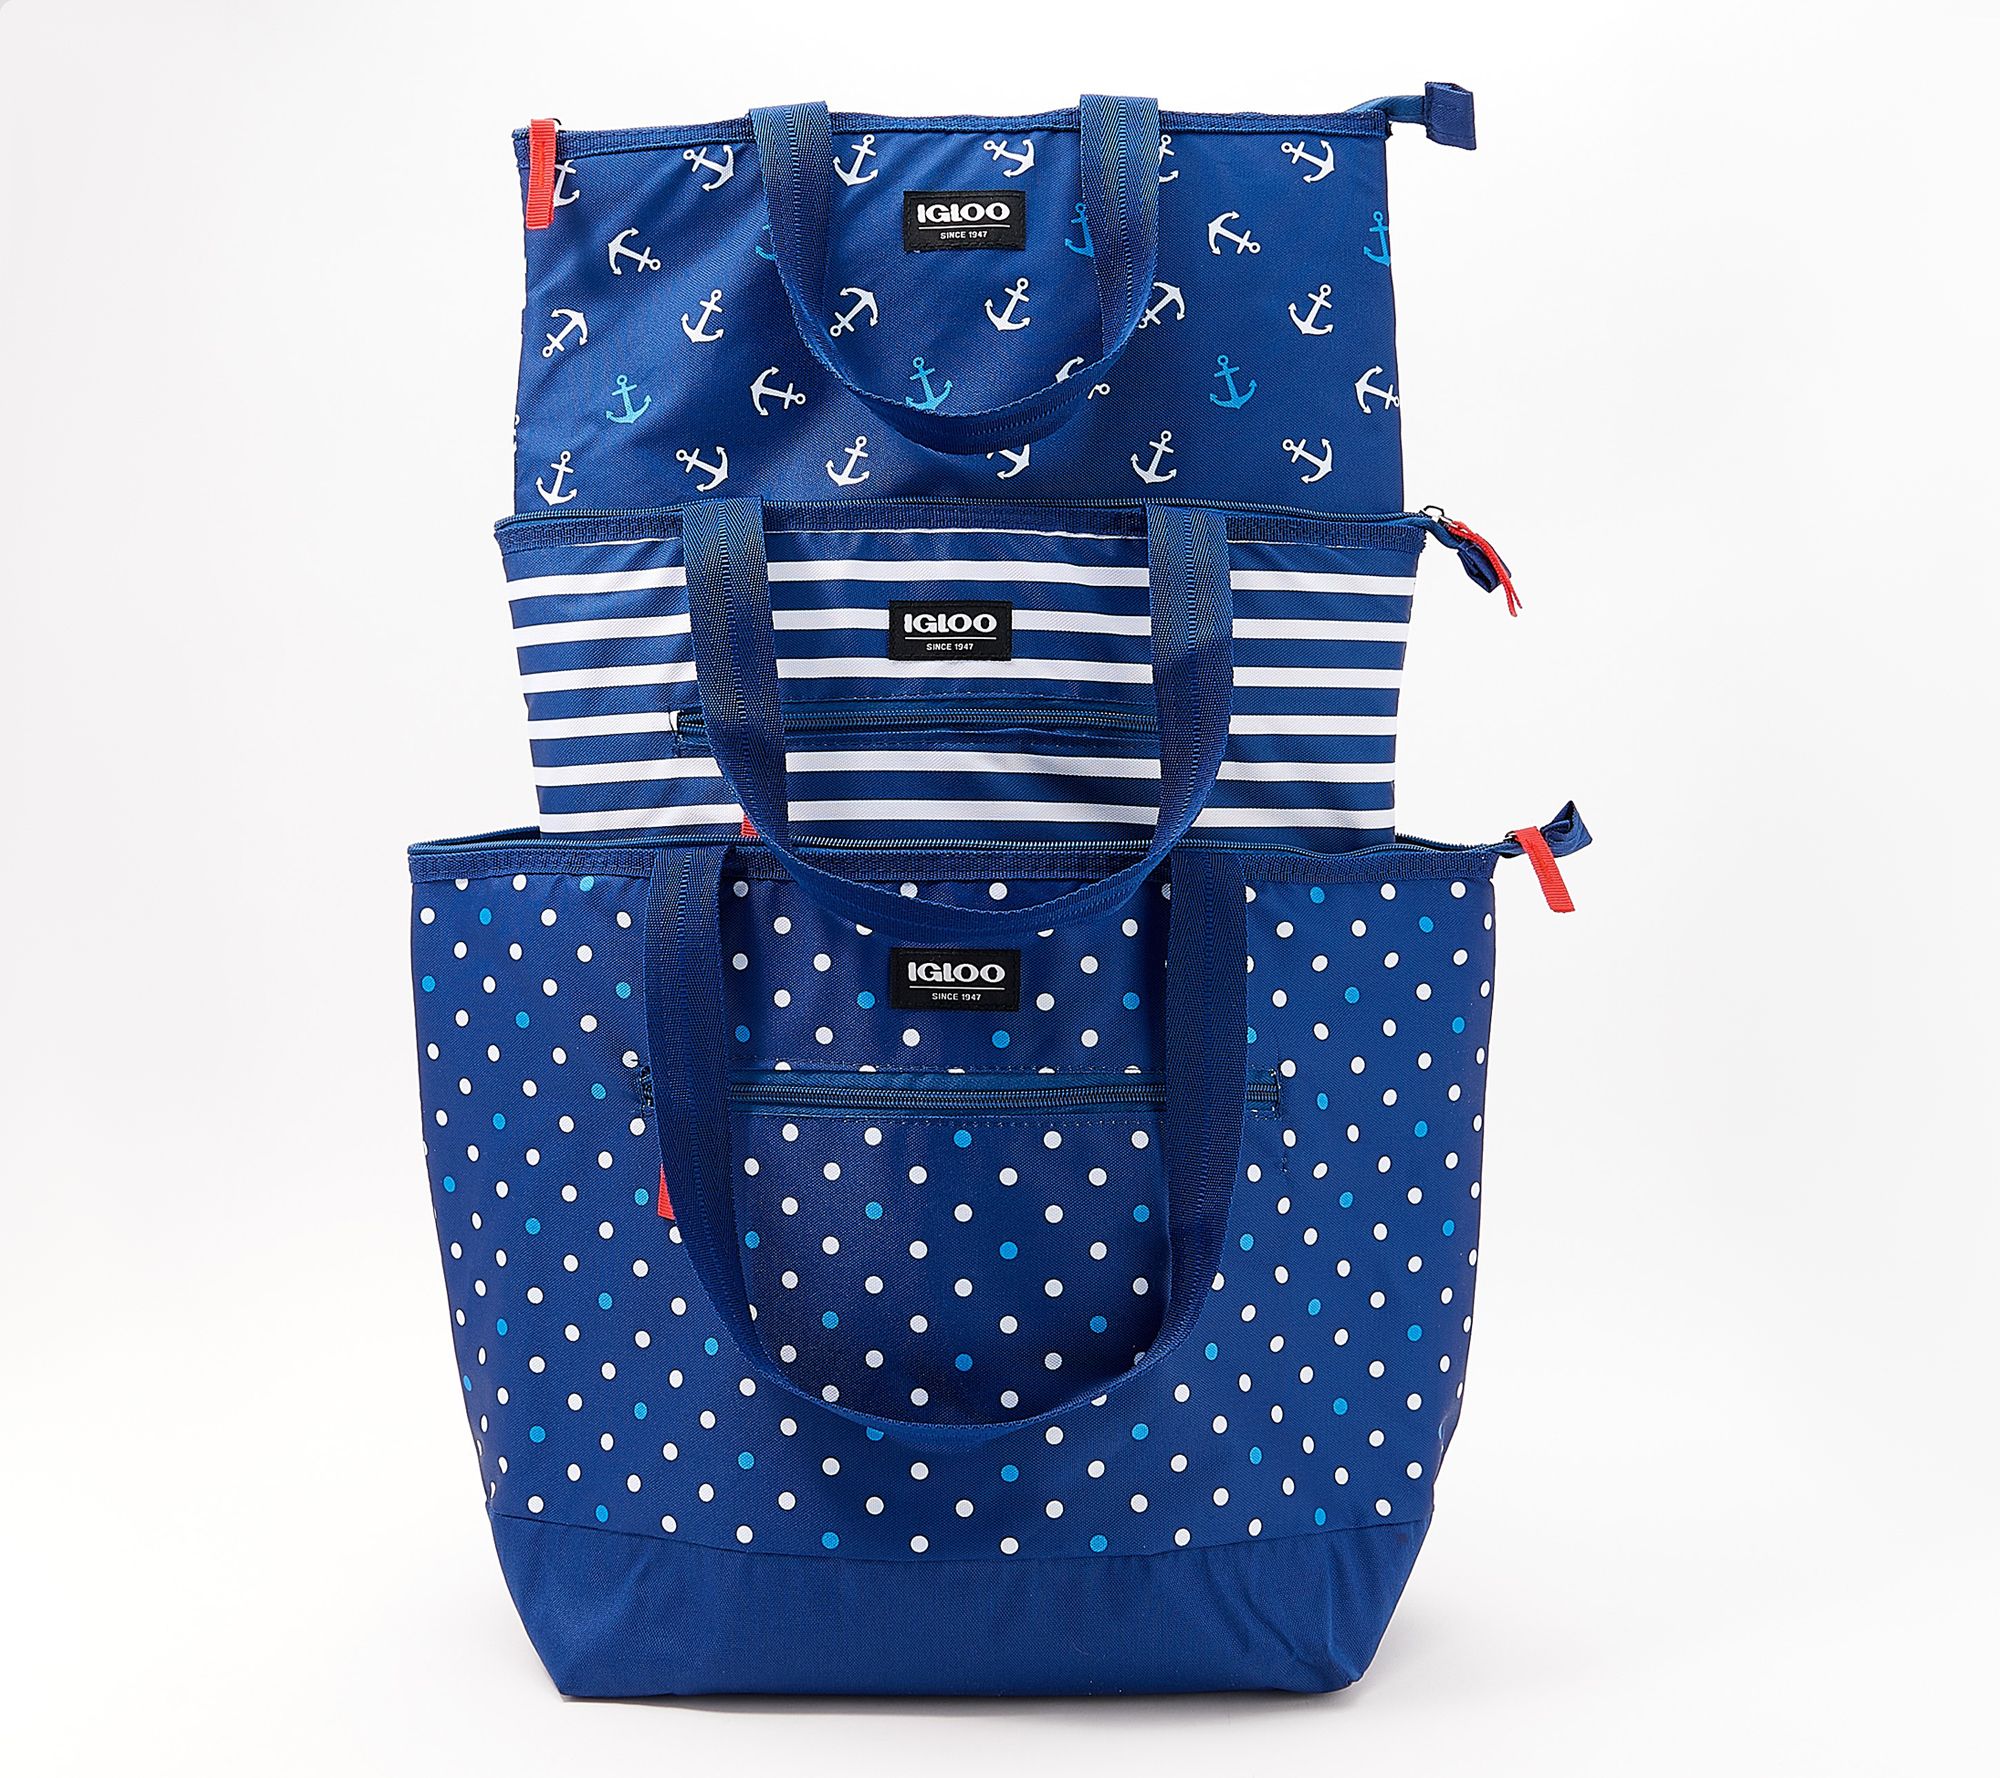 Igloo Insulated 3-Piece Trend Tote Set 